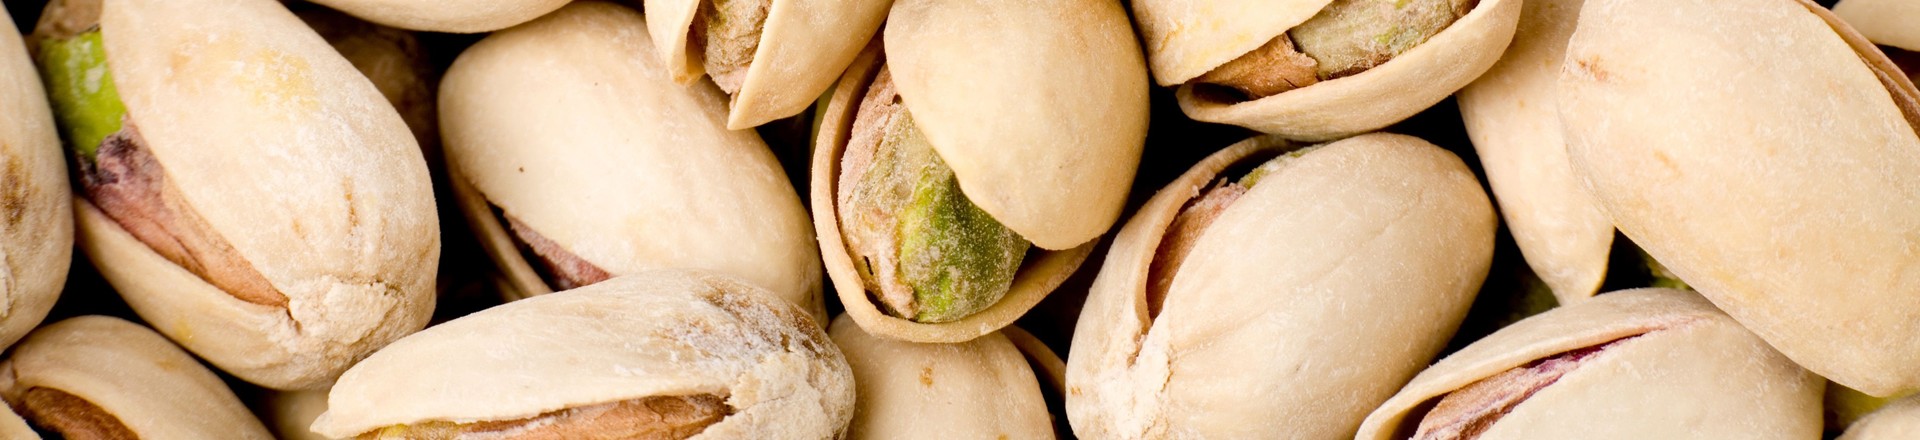 Pistachios are good for you because they are compact purveyors of protein, fiber, healthy fat, and antioxidants, and cholesterol-lowering nutrients.